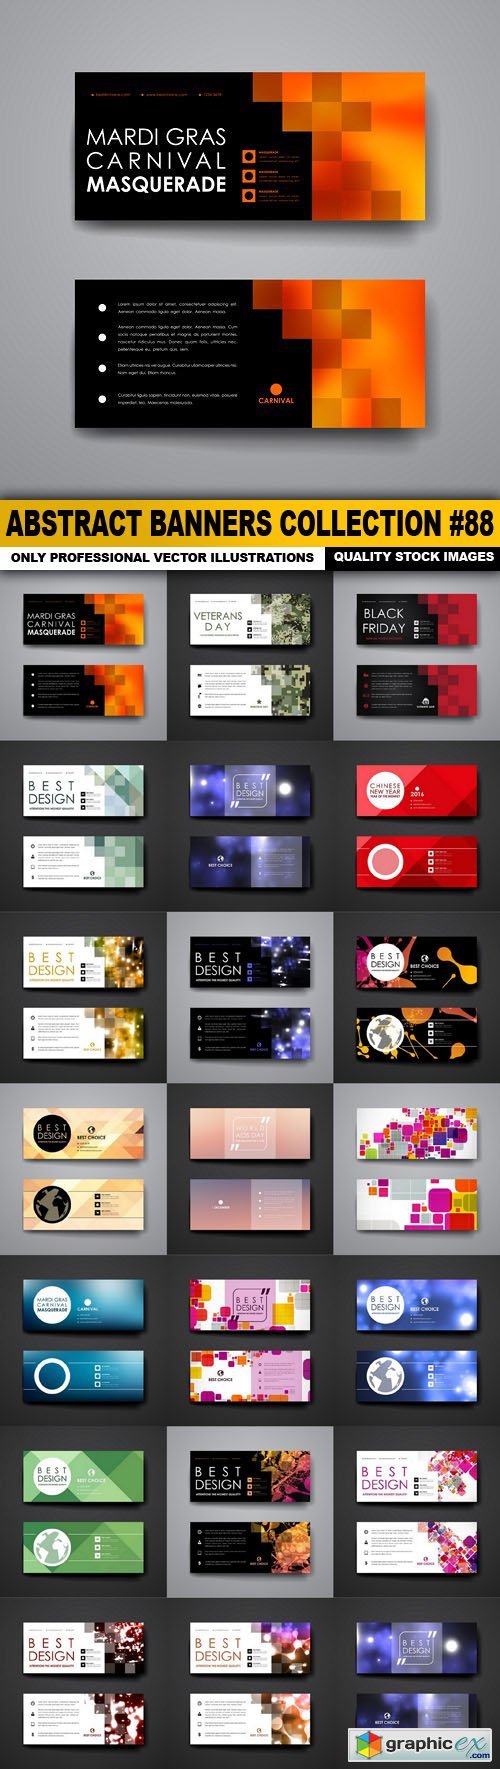 Abstract Banners Collection #88 - 20 Vectors